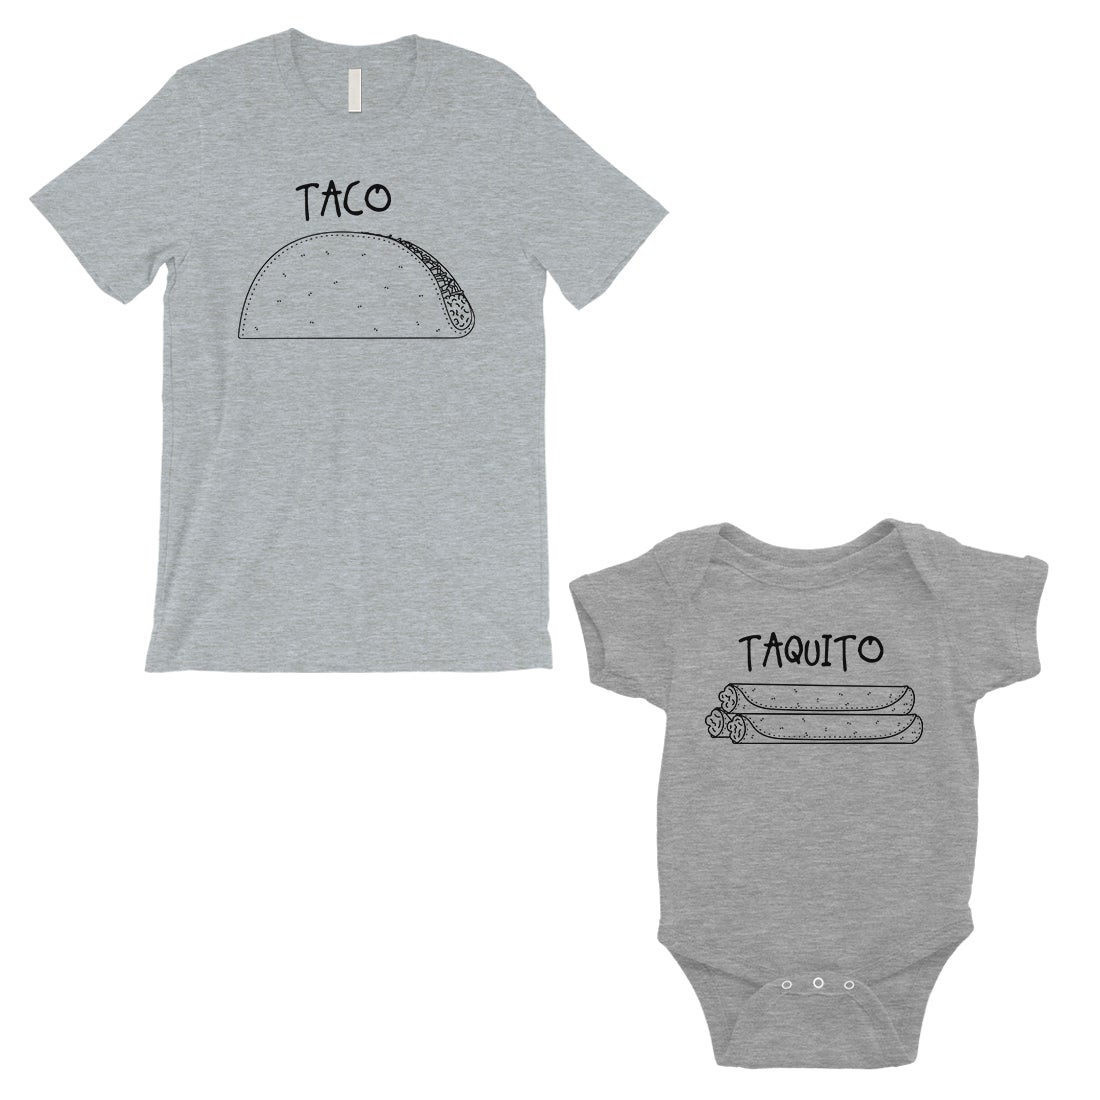 Taco Taquito Dad and Baby Matching Outfits Grey